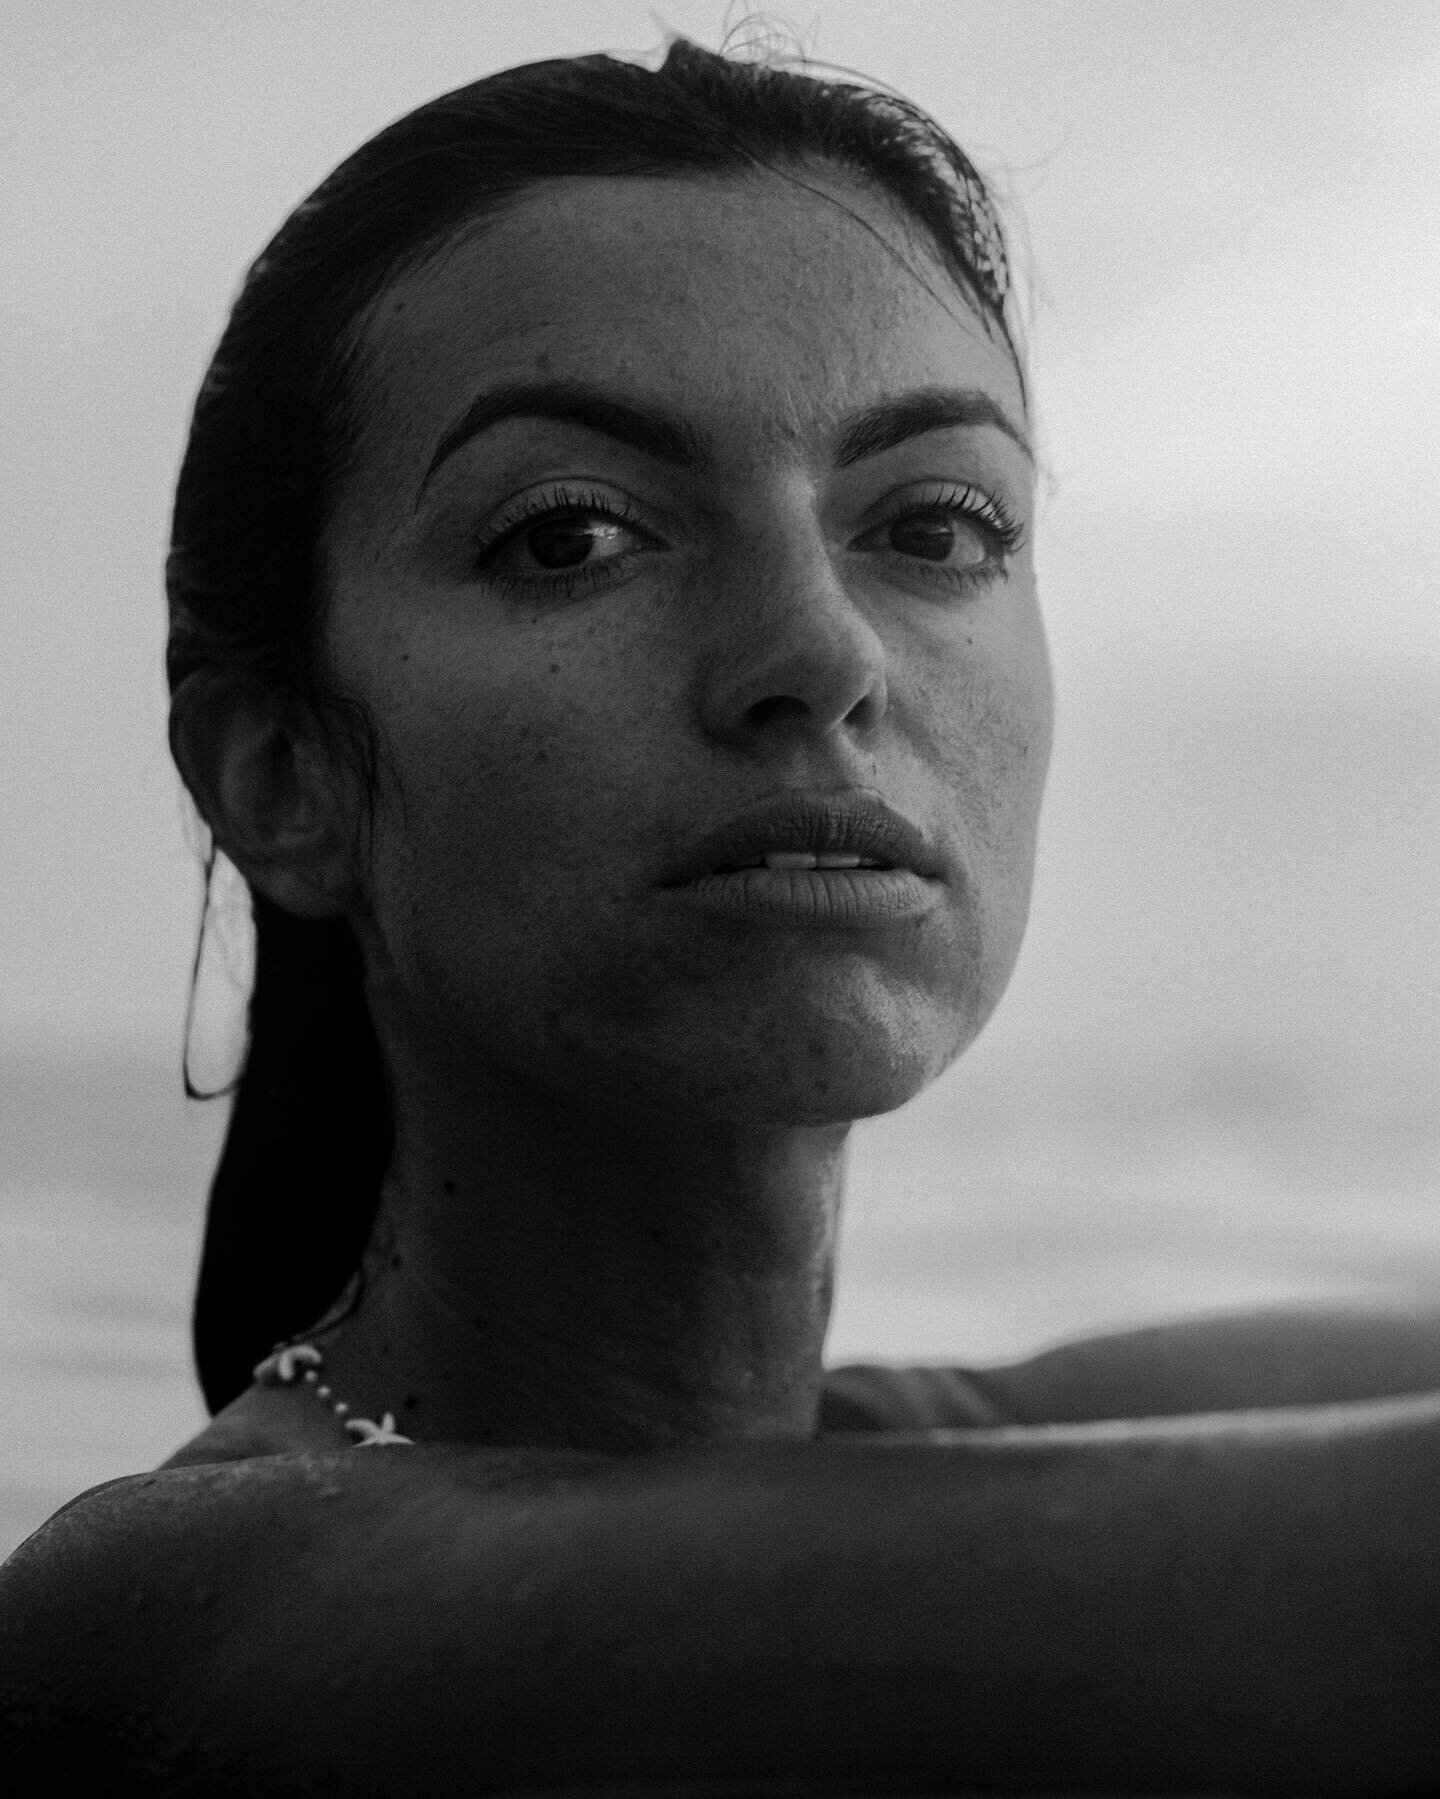 beautiful @drcamimorelli from a recent portrait session in mexico

.
.
.
.
.
#blackandwhiteportraits #blackandwhitephotographylovers #oceanphotography #portraitsessions #oceanlifestyle